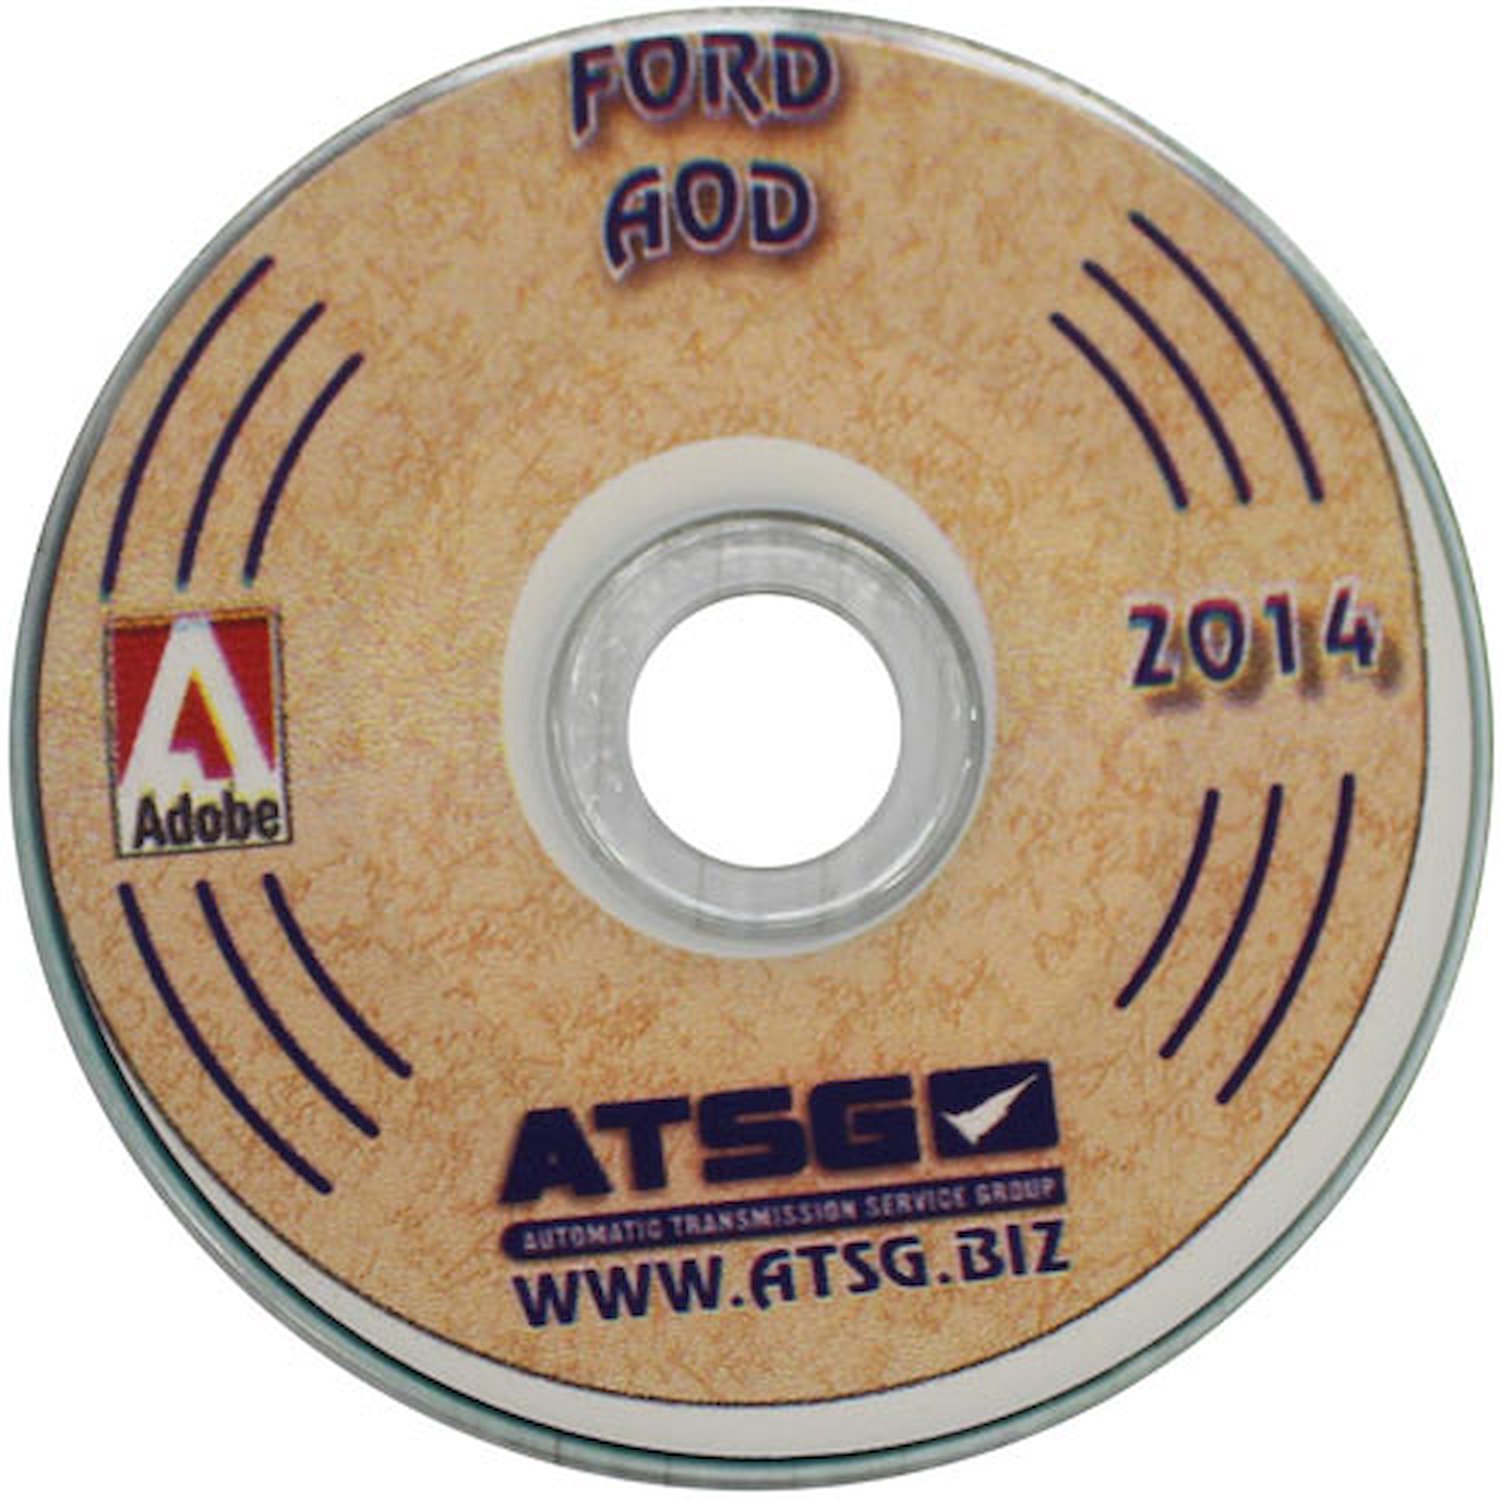 Transmission Technical Manual On CD Ford AOD